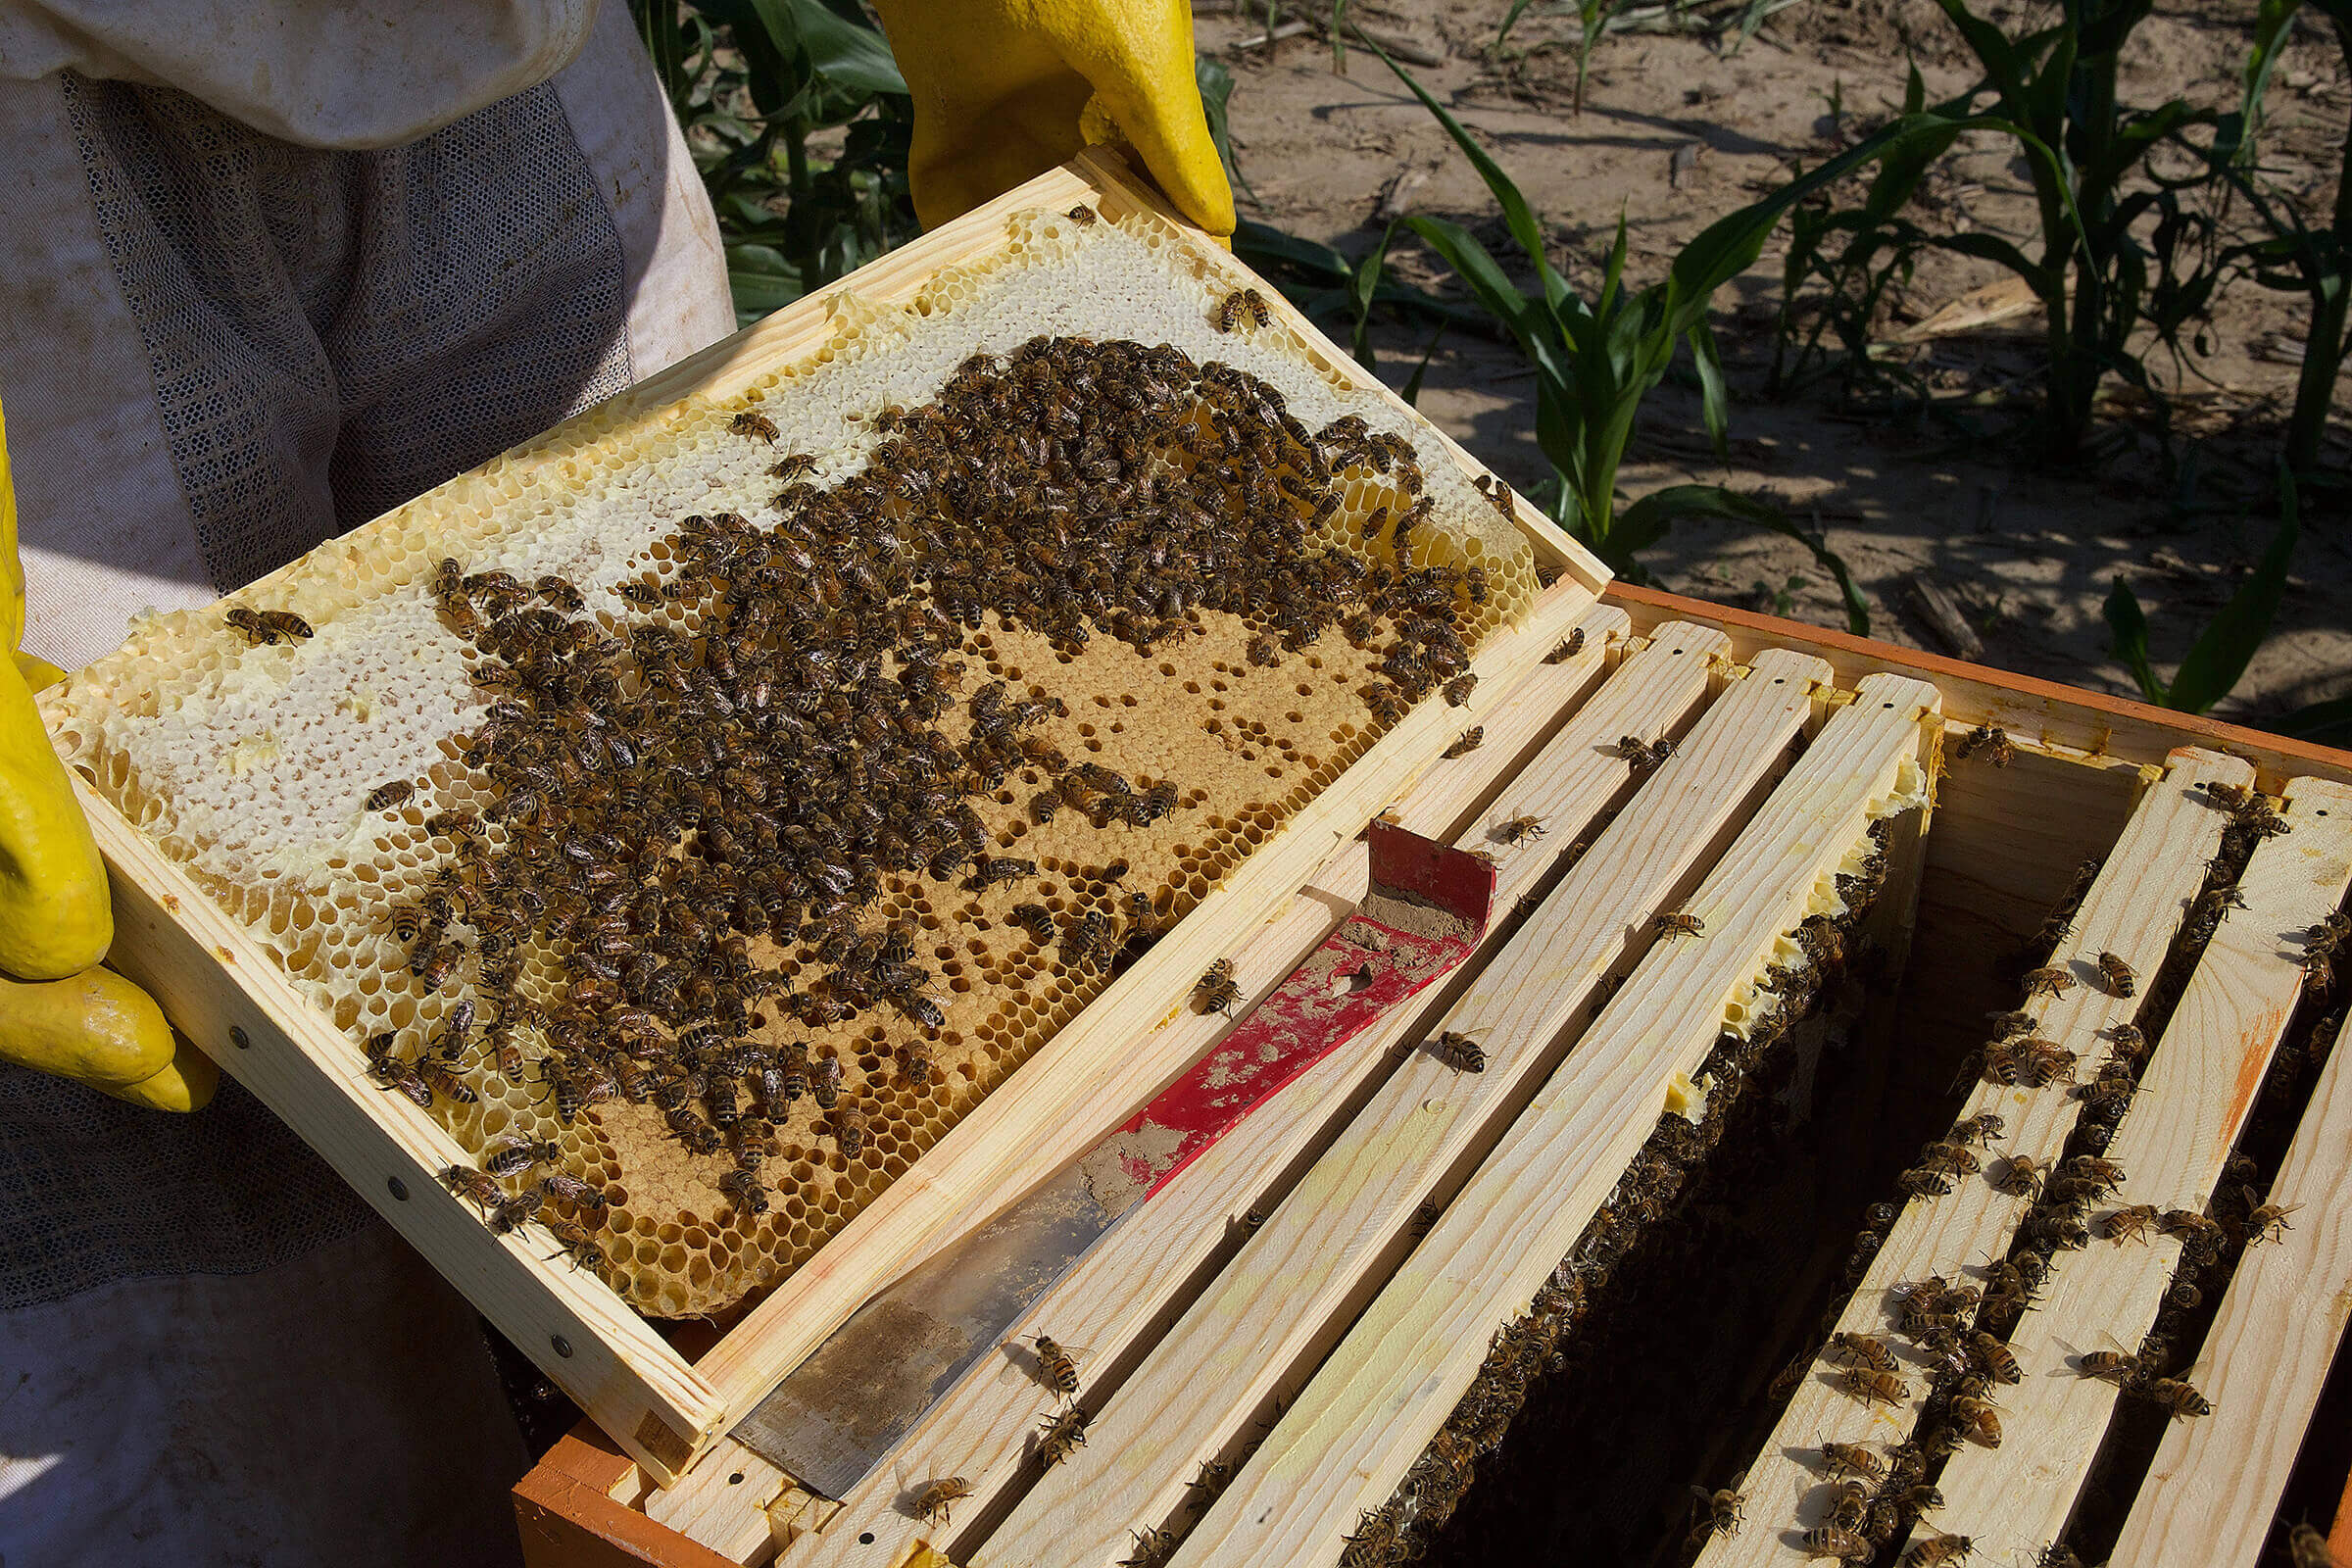 The Beescape online tool will allow beekeeper and anyone who provides refuge and forage for pollinators to assess the safety and suitability of an apiary’s location. (Purdue College of Agriculture photo)